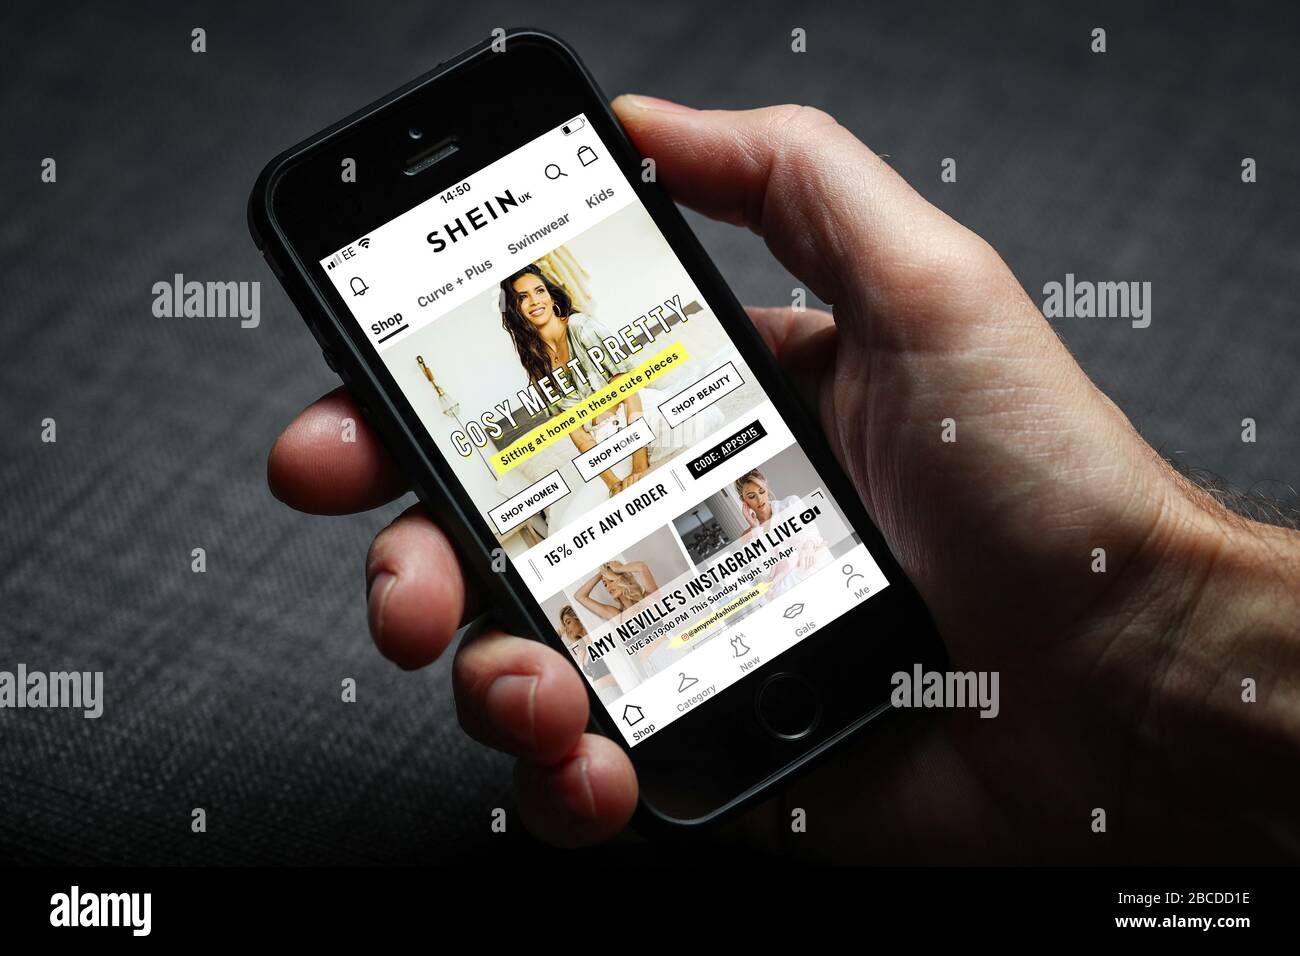 Shopping on the Shein app on a mobile phone Stock Photo - Alamy